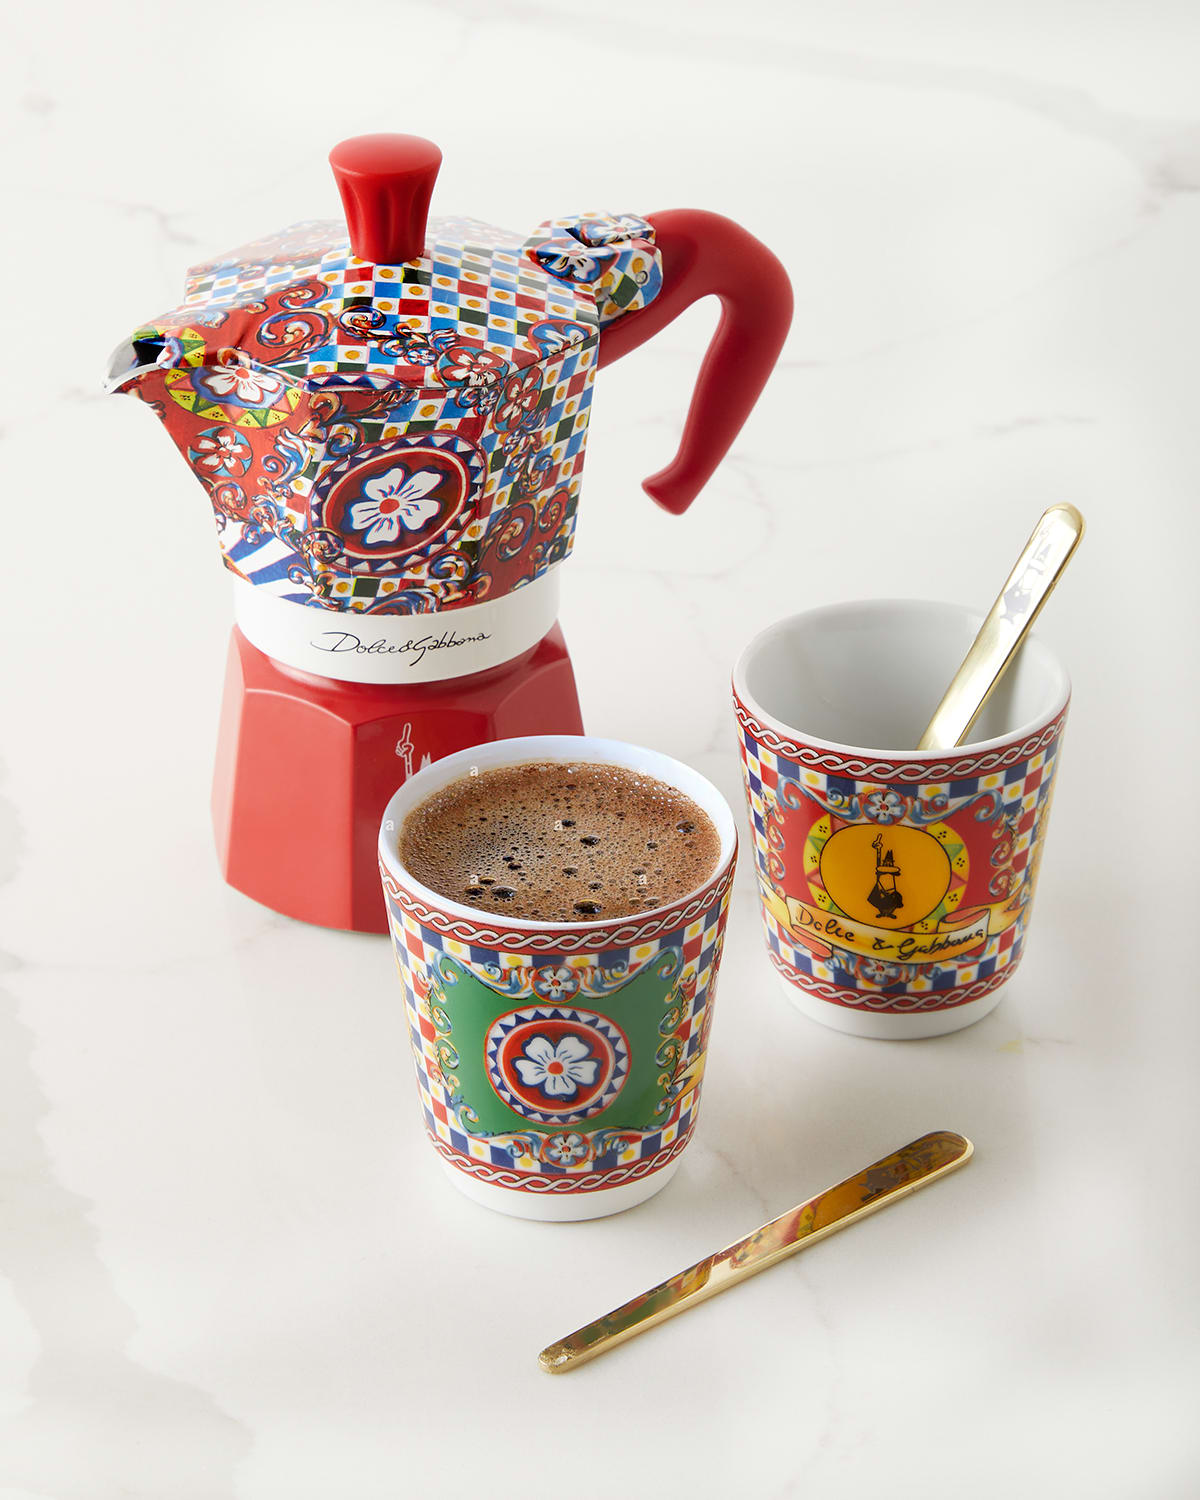 Bialetti X Dolce & Gabbana 2 Cup Moka Pot With Porcelain Cups And Golden Stirrers In Multi